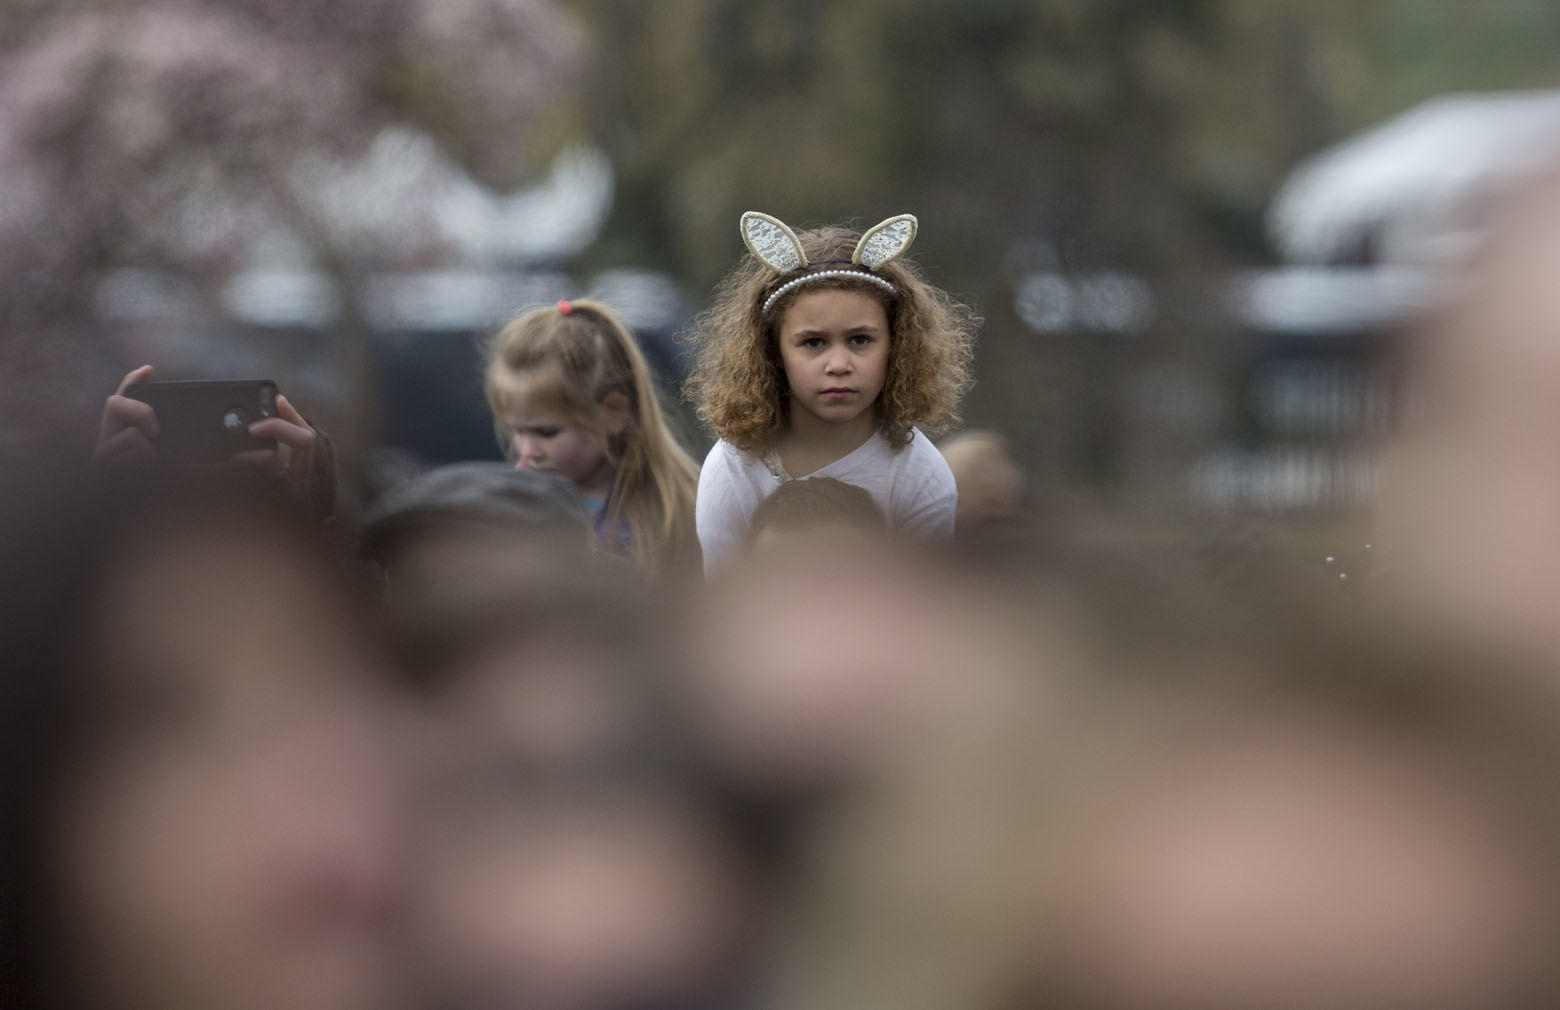 Kids are held high to see over the crowd as President Donald Trump and first lady Melania Trump participate in the annual White House Easter Egg Roll at the White House in Washington, Monday, April 2, 2018. (AP Photo/Carolyn Kaster)